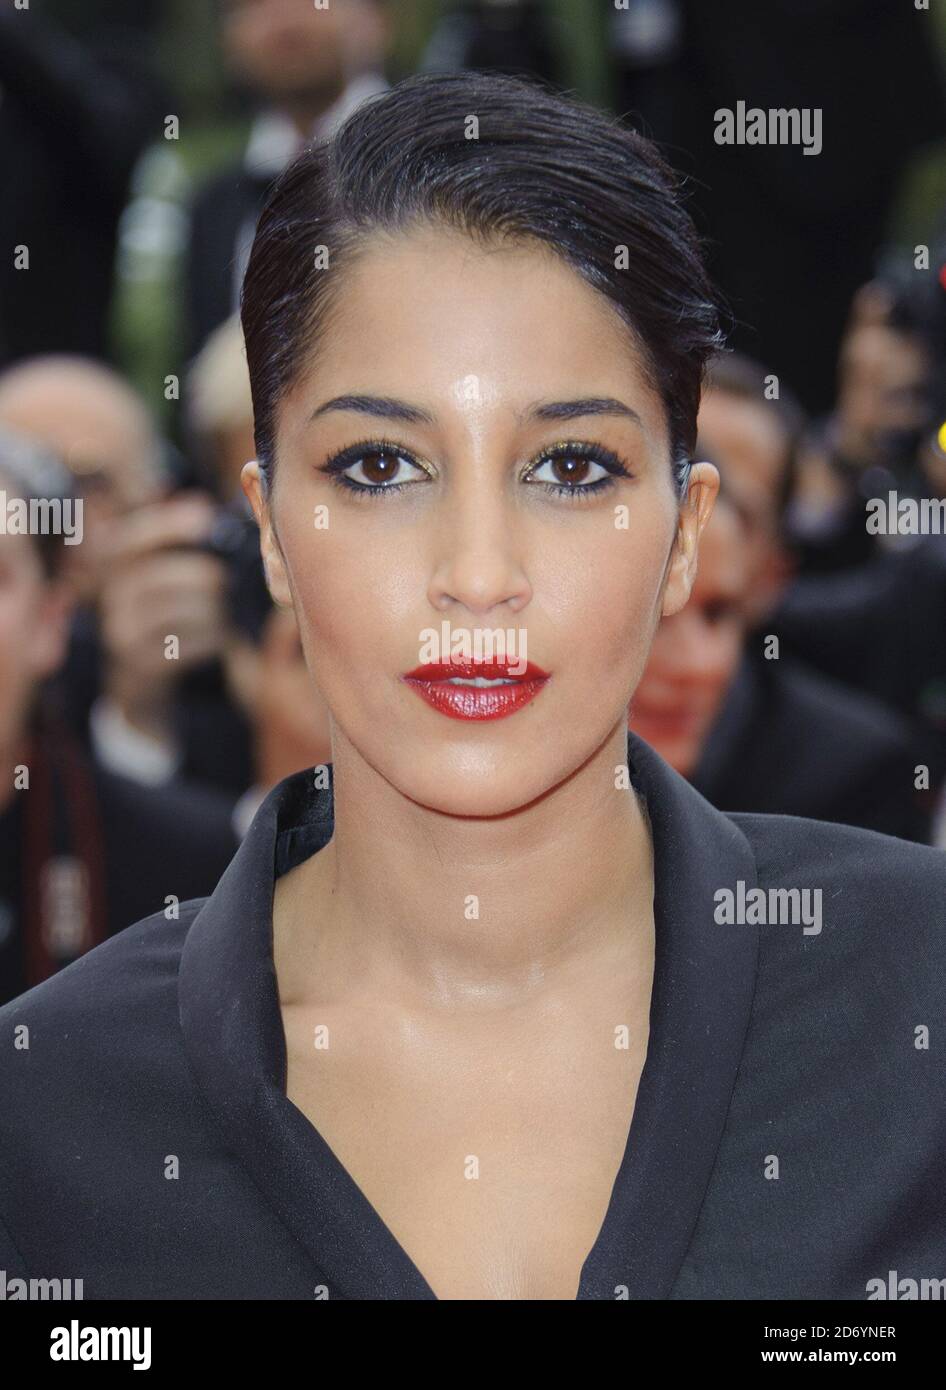 Leila Bekhti Arriving At The Premiere Of Les Bien Aimes And The Closing Ceremony Of The 64th Cannes International Film Festival At The Palais Des Festivales In Cannes France Stock Photo Alamy